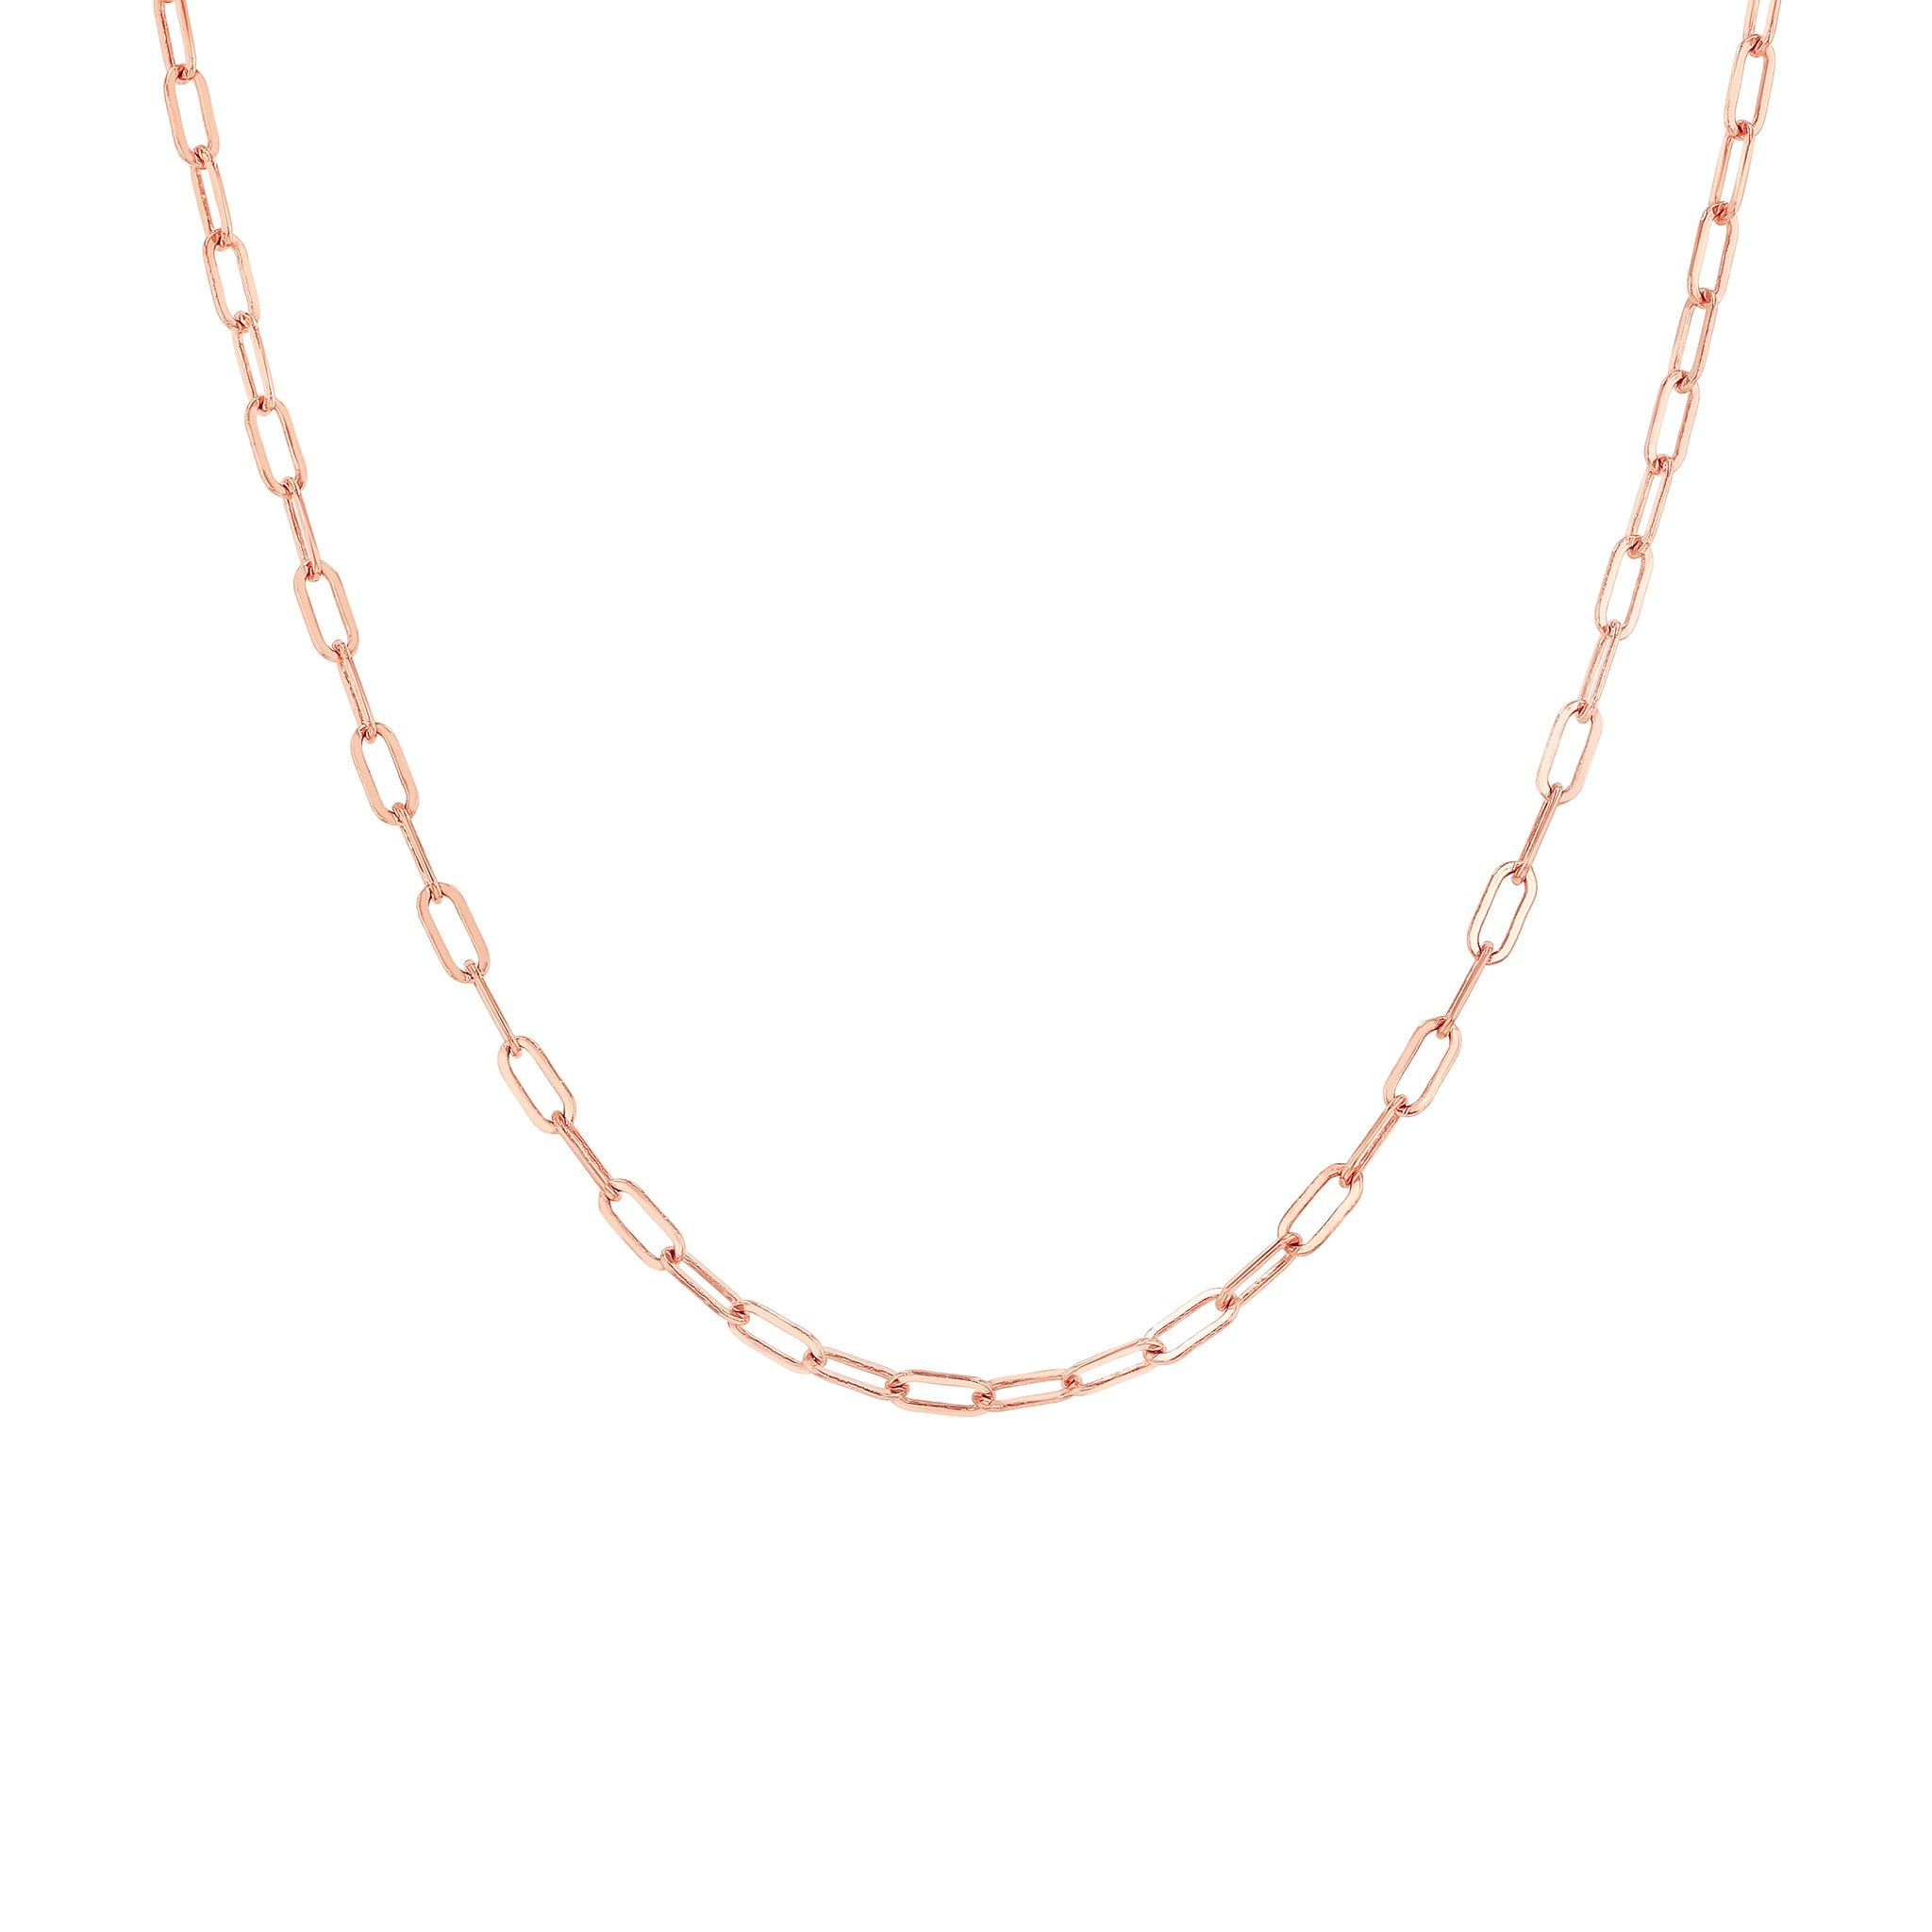 Grace Lee Petite Link Necklace, 14K Rose Gold | What Is Infinity Jewelry?  Here's Why You Need to Try Out This Dainty Trend | POPSUGAR Fashion Photo 8